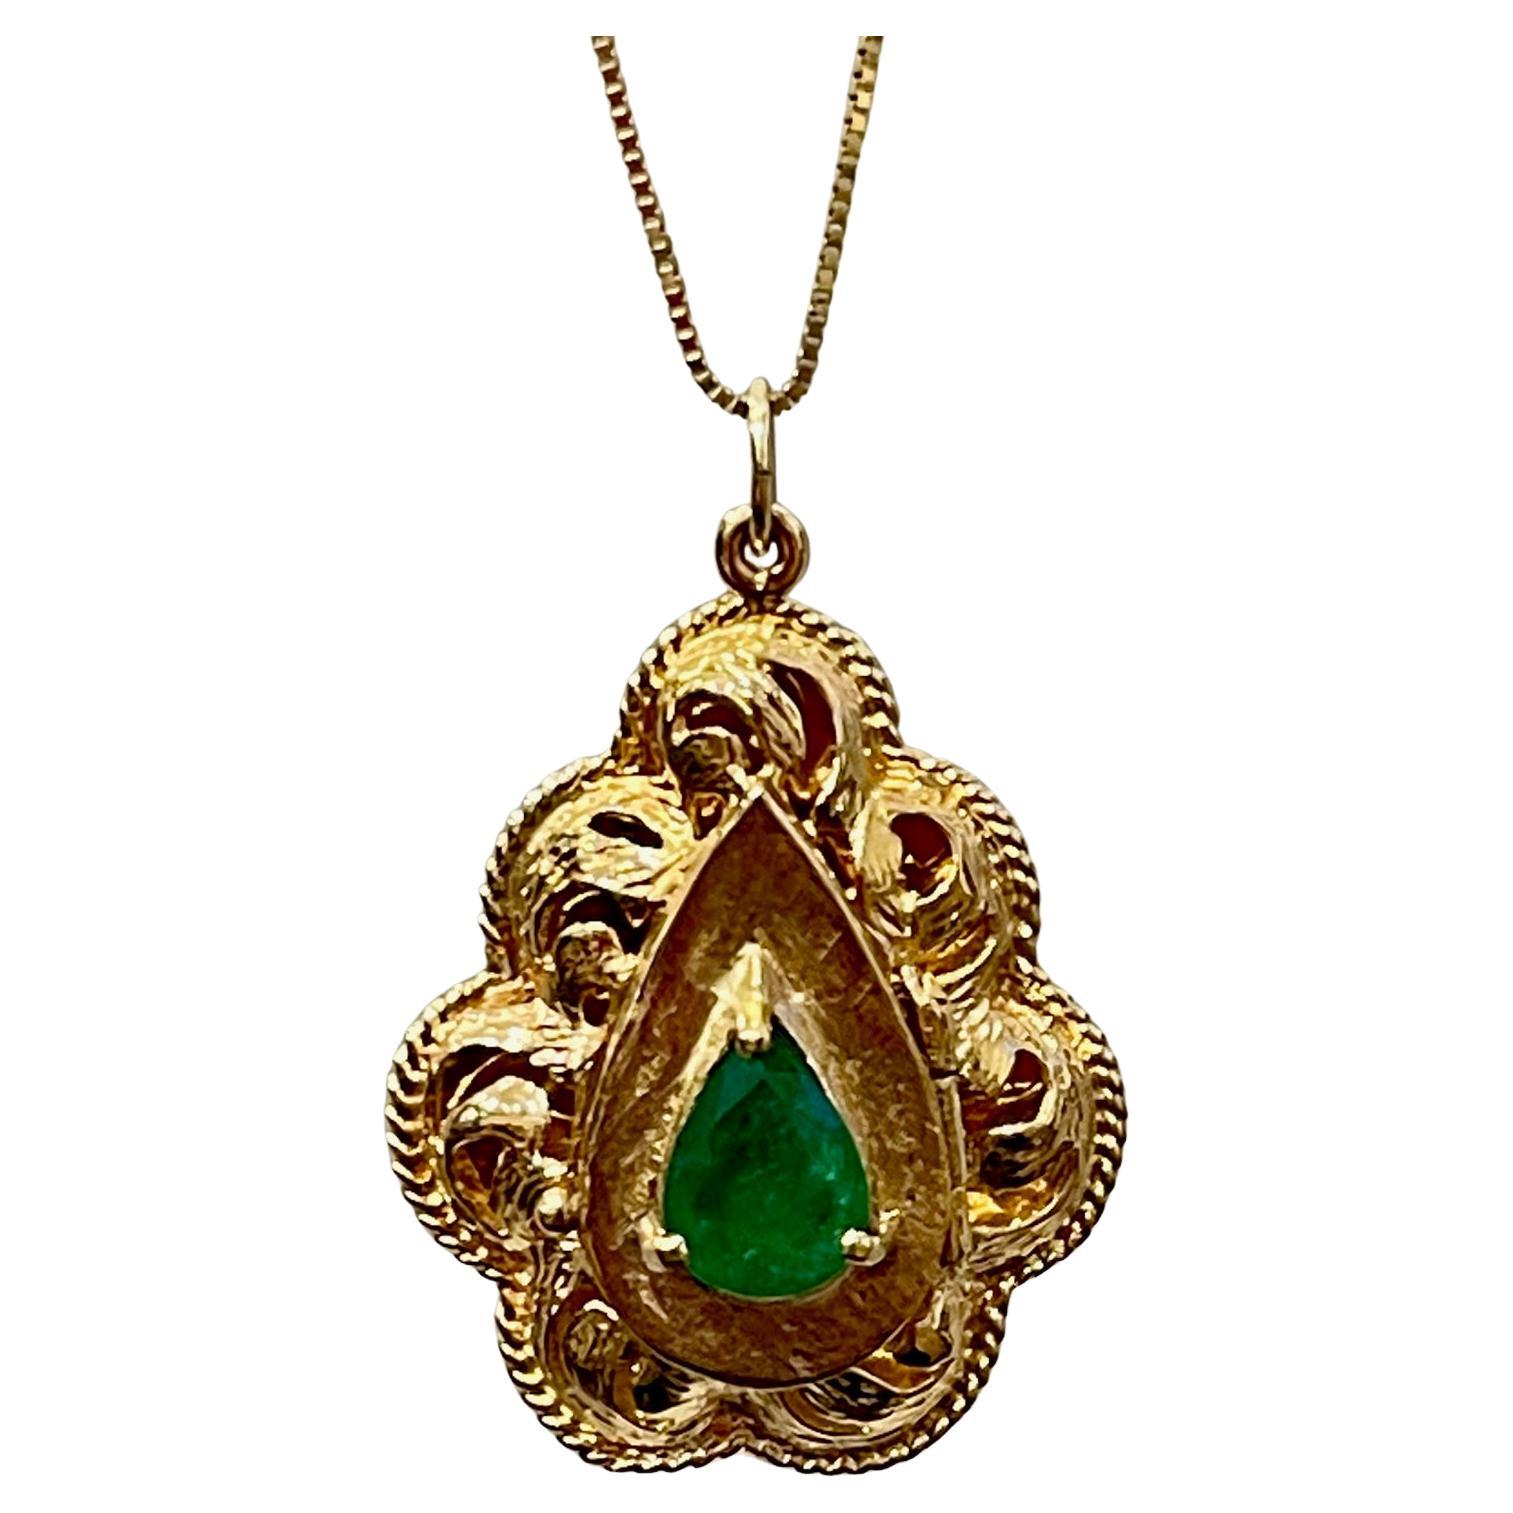 Vintage 14 Karat Yellow Gold 10.5 Gm Chain with Locket and Natural Emerald